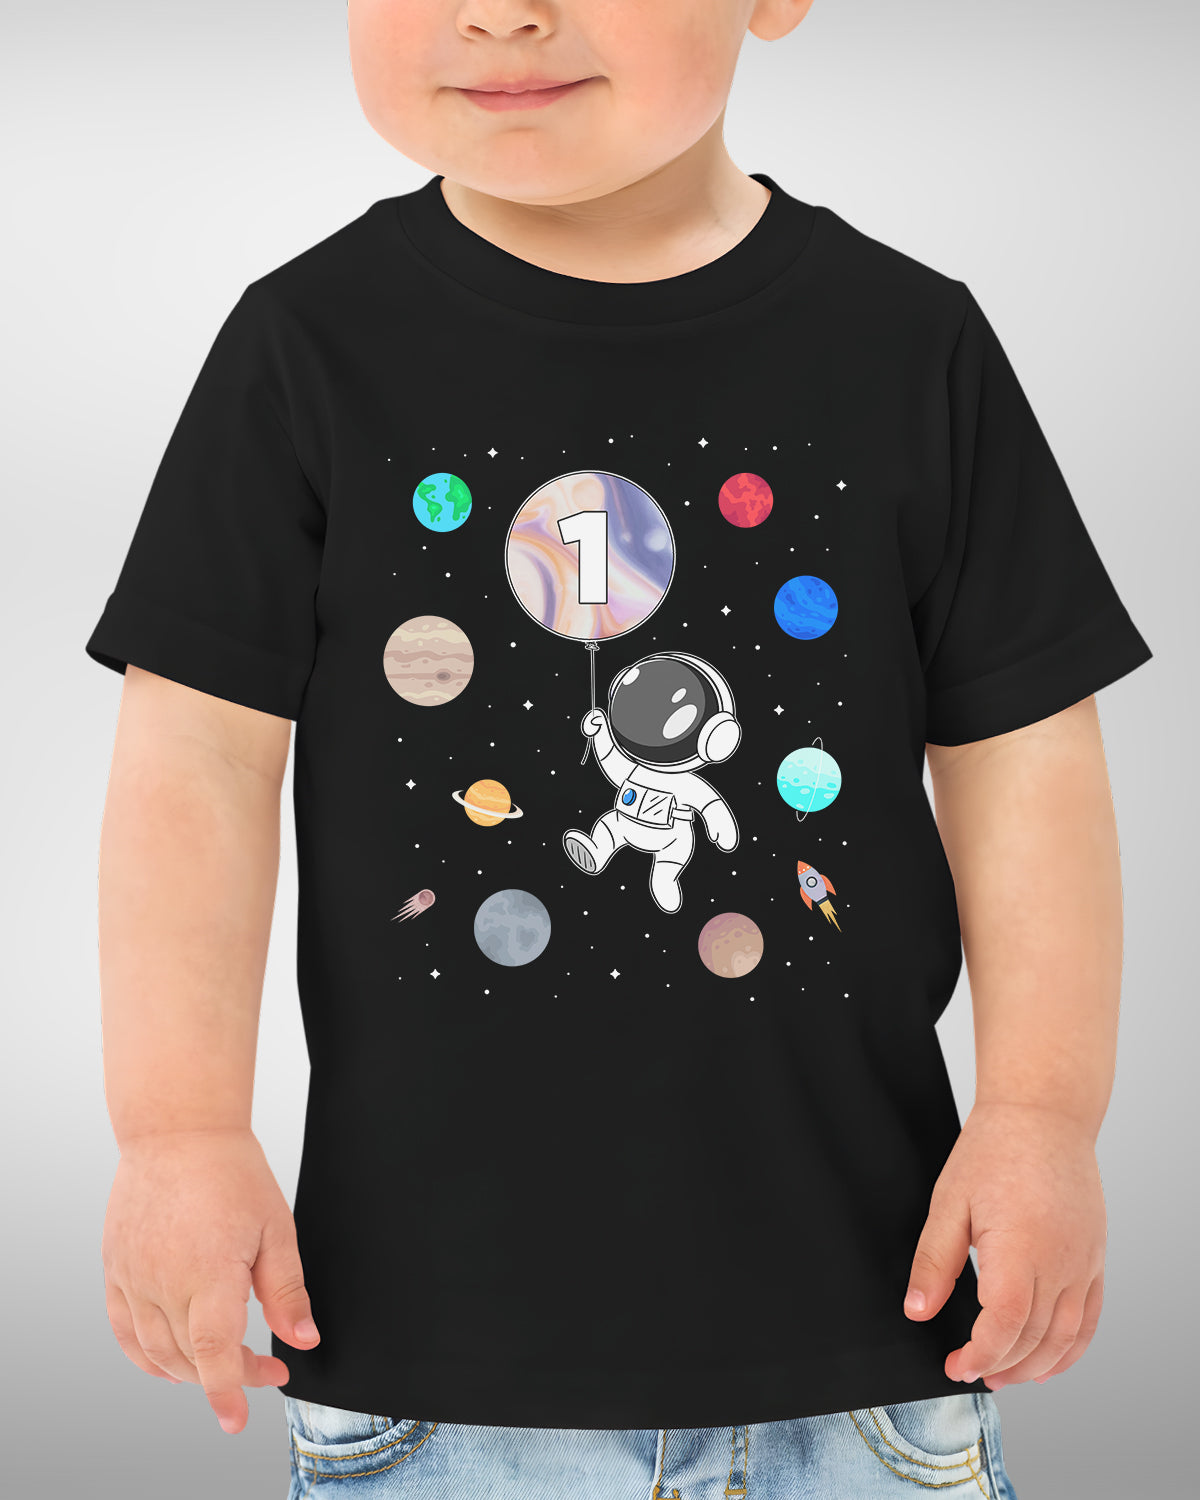 1st Birthday Astronaut Shirt, One Space Themed, First Trip Around the Sun, Rocket Tee for One Year Old, Moon and Planets Baby Outfit